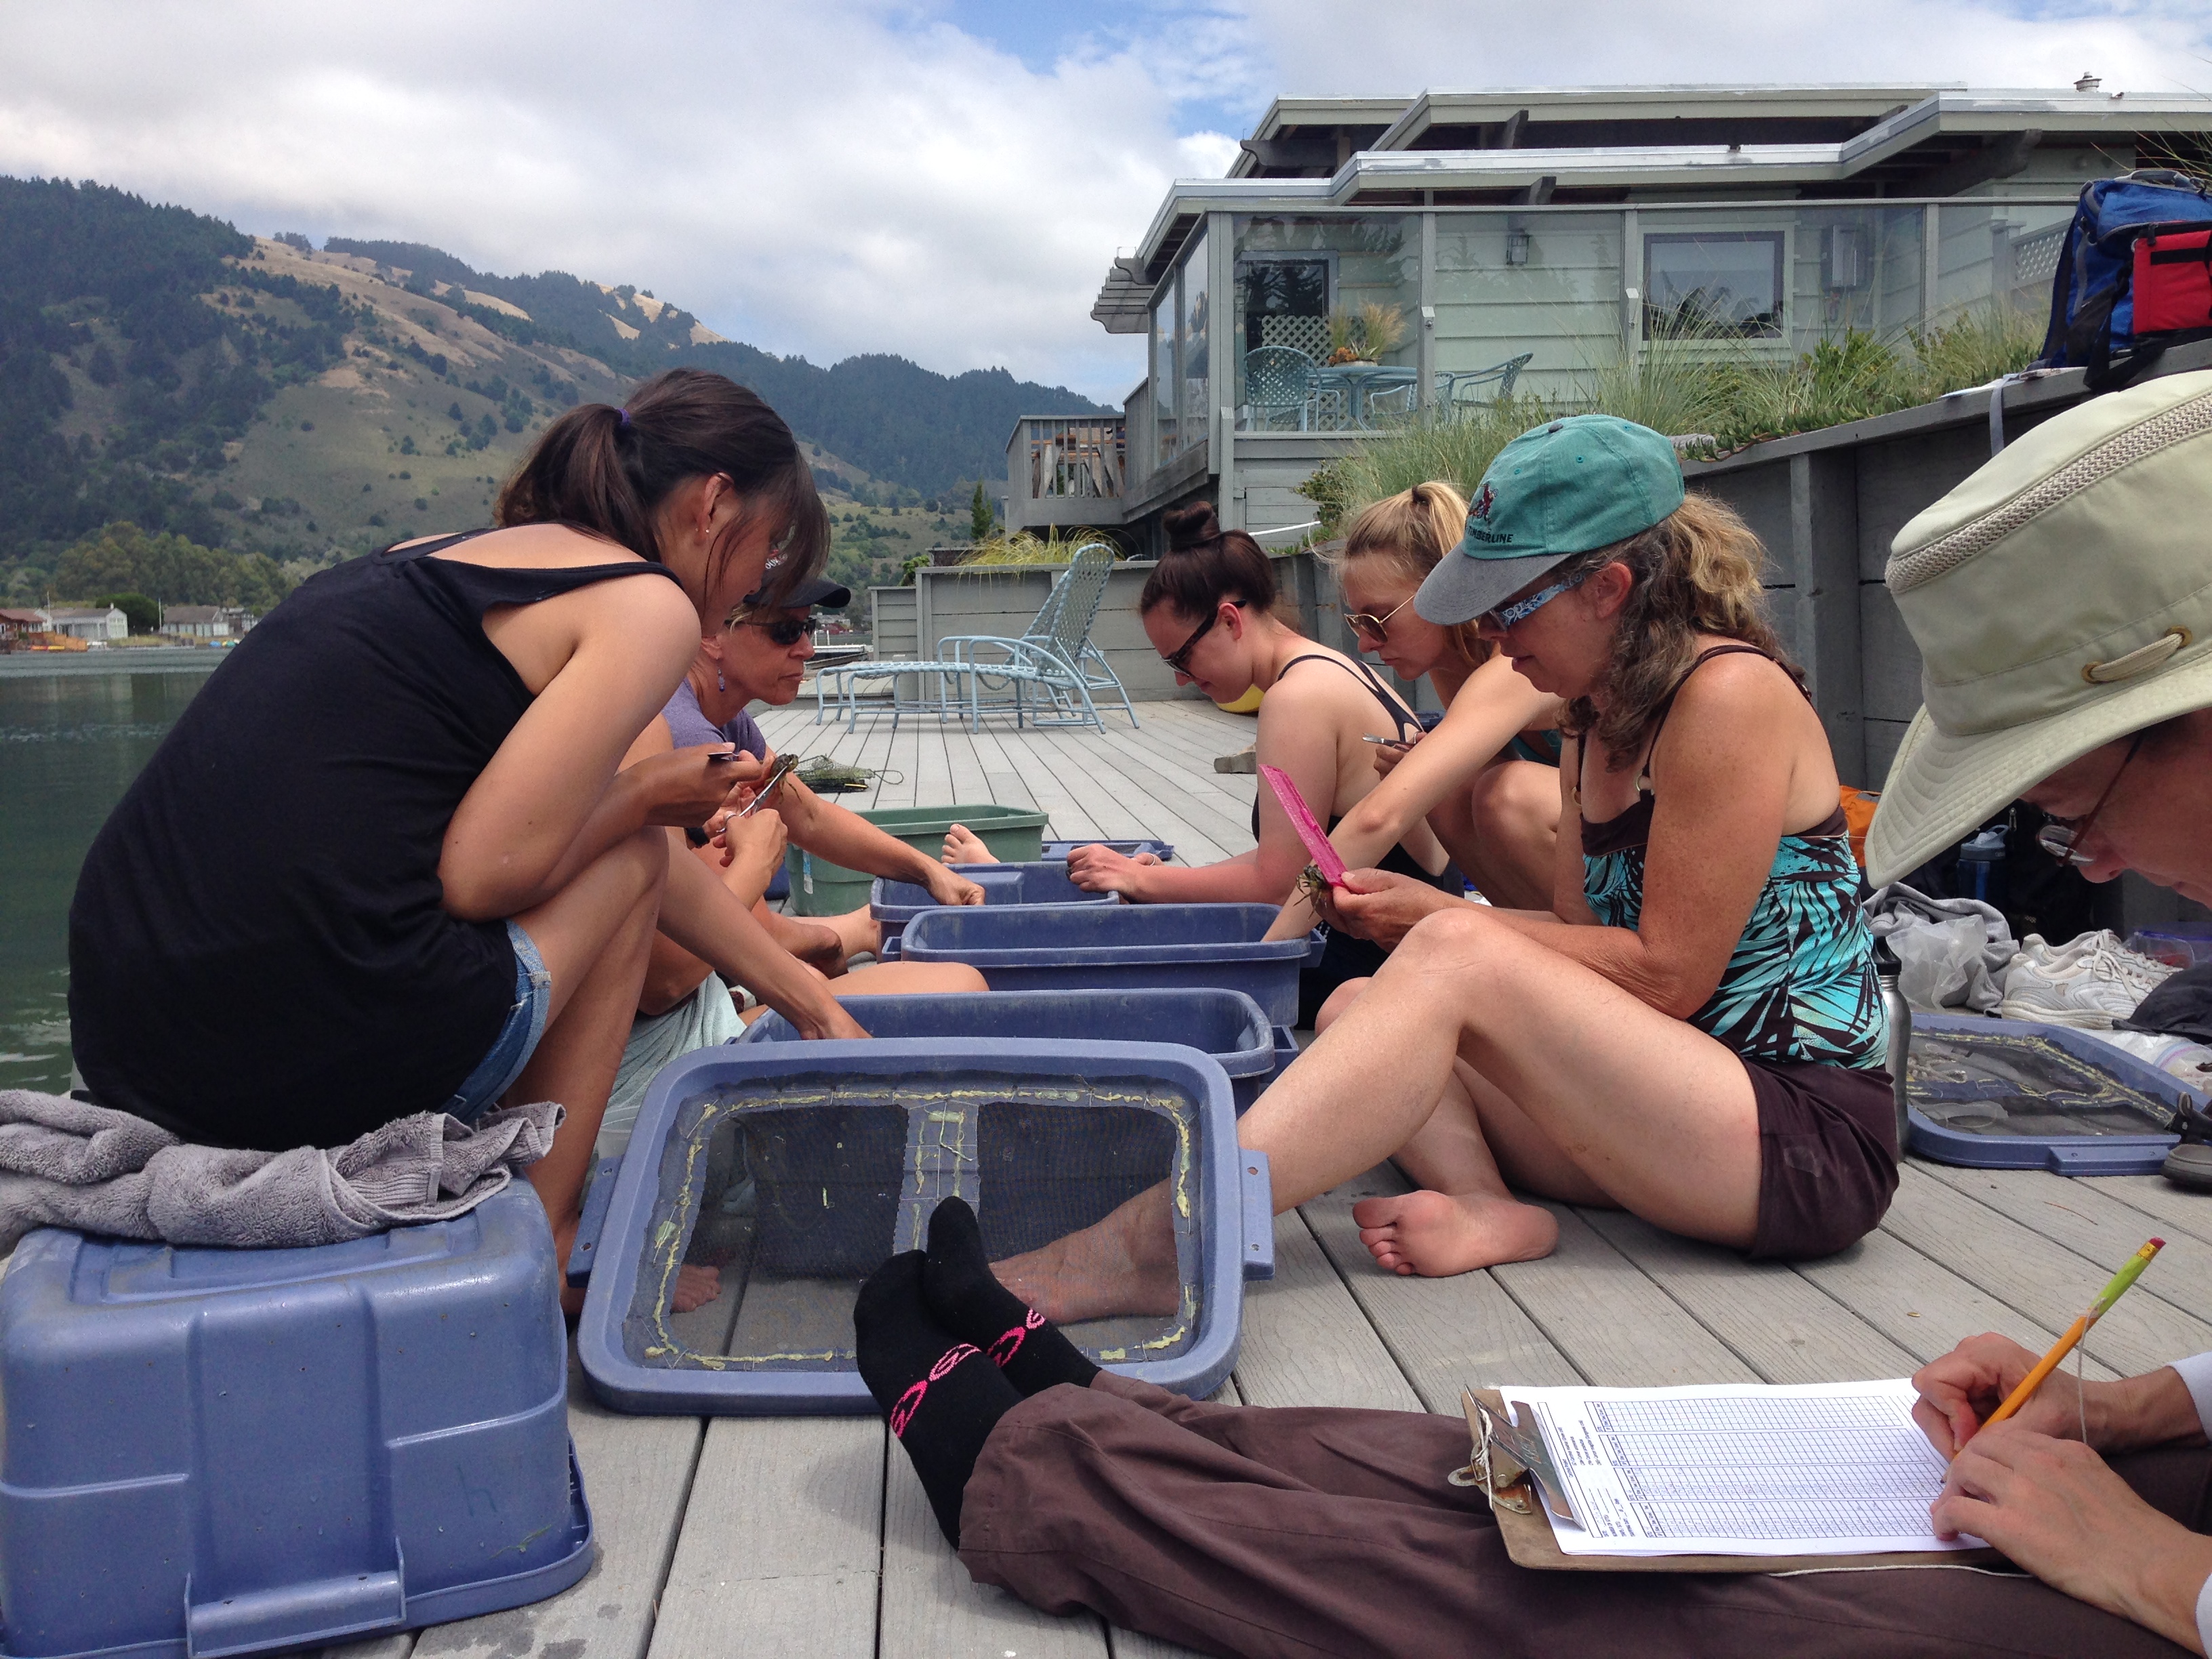 Group on dock measuring crabs in blue crates